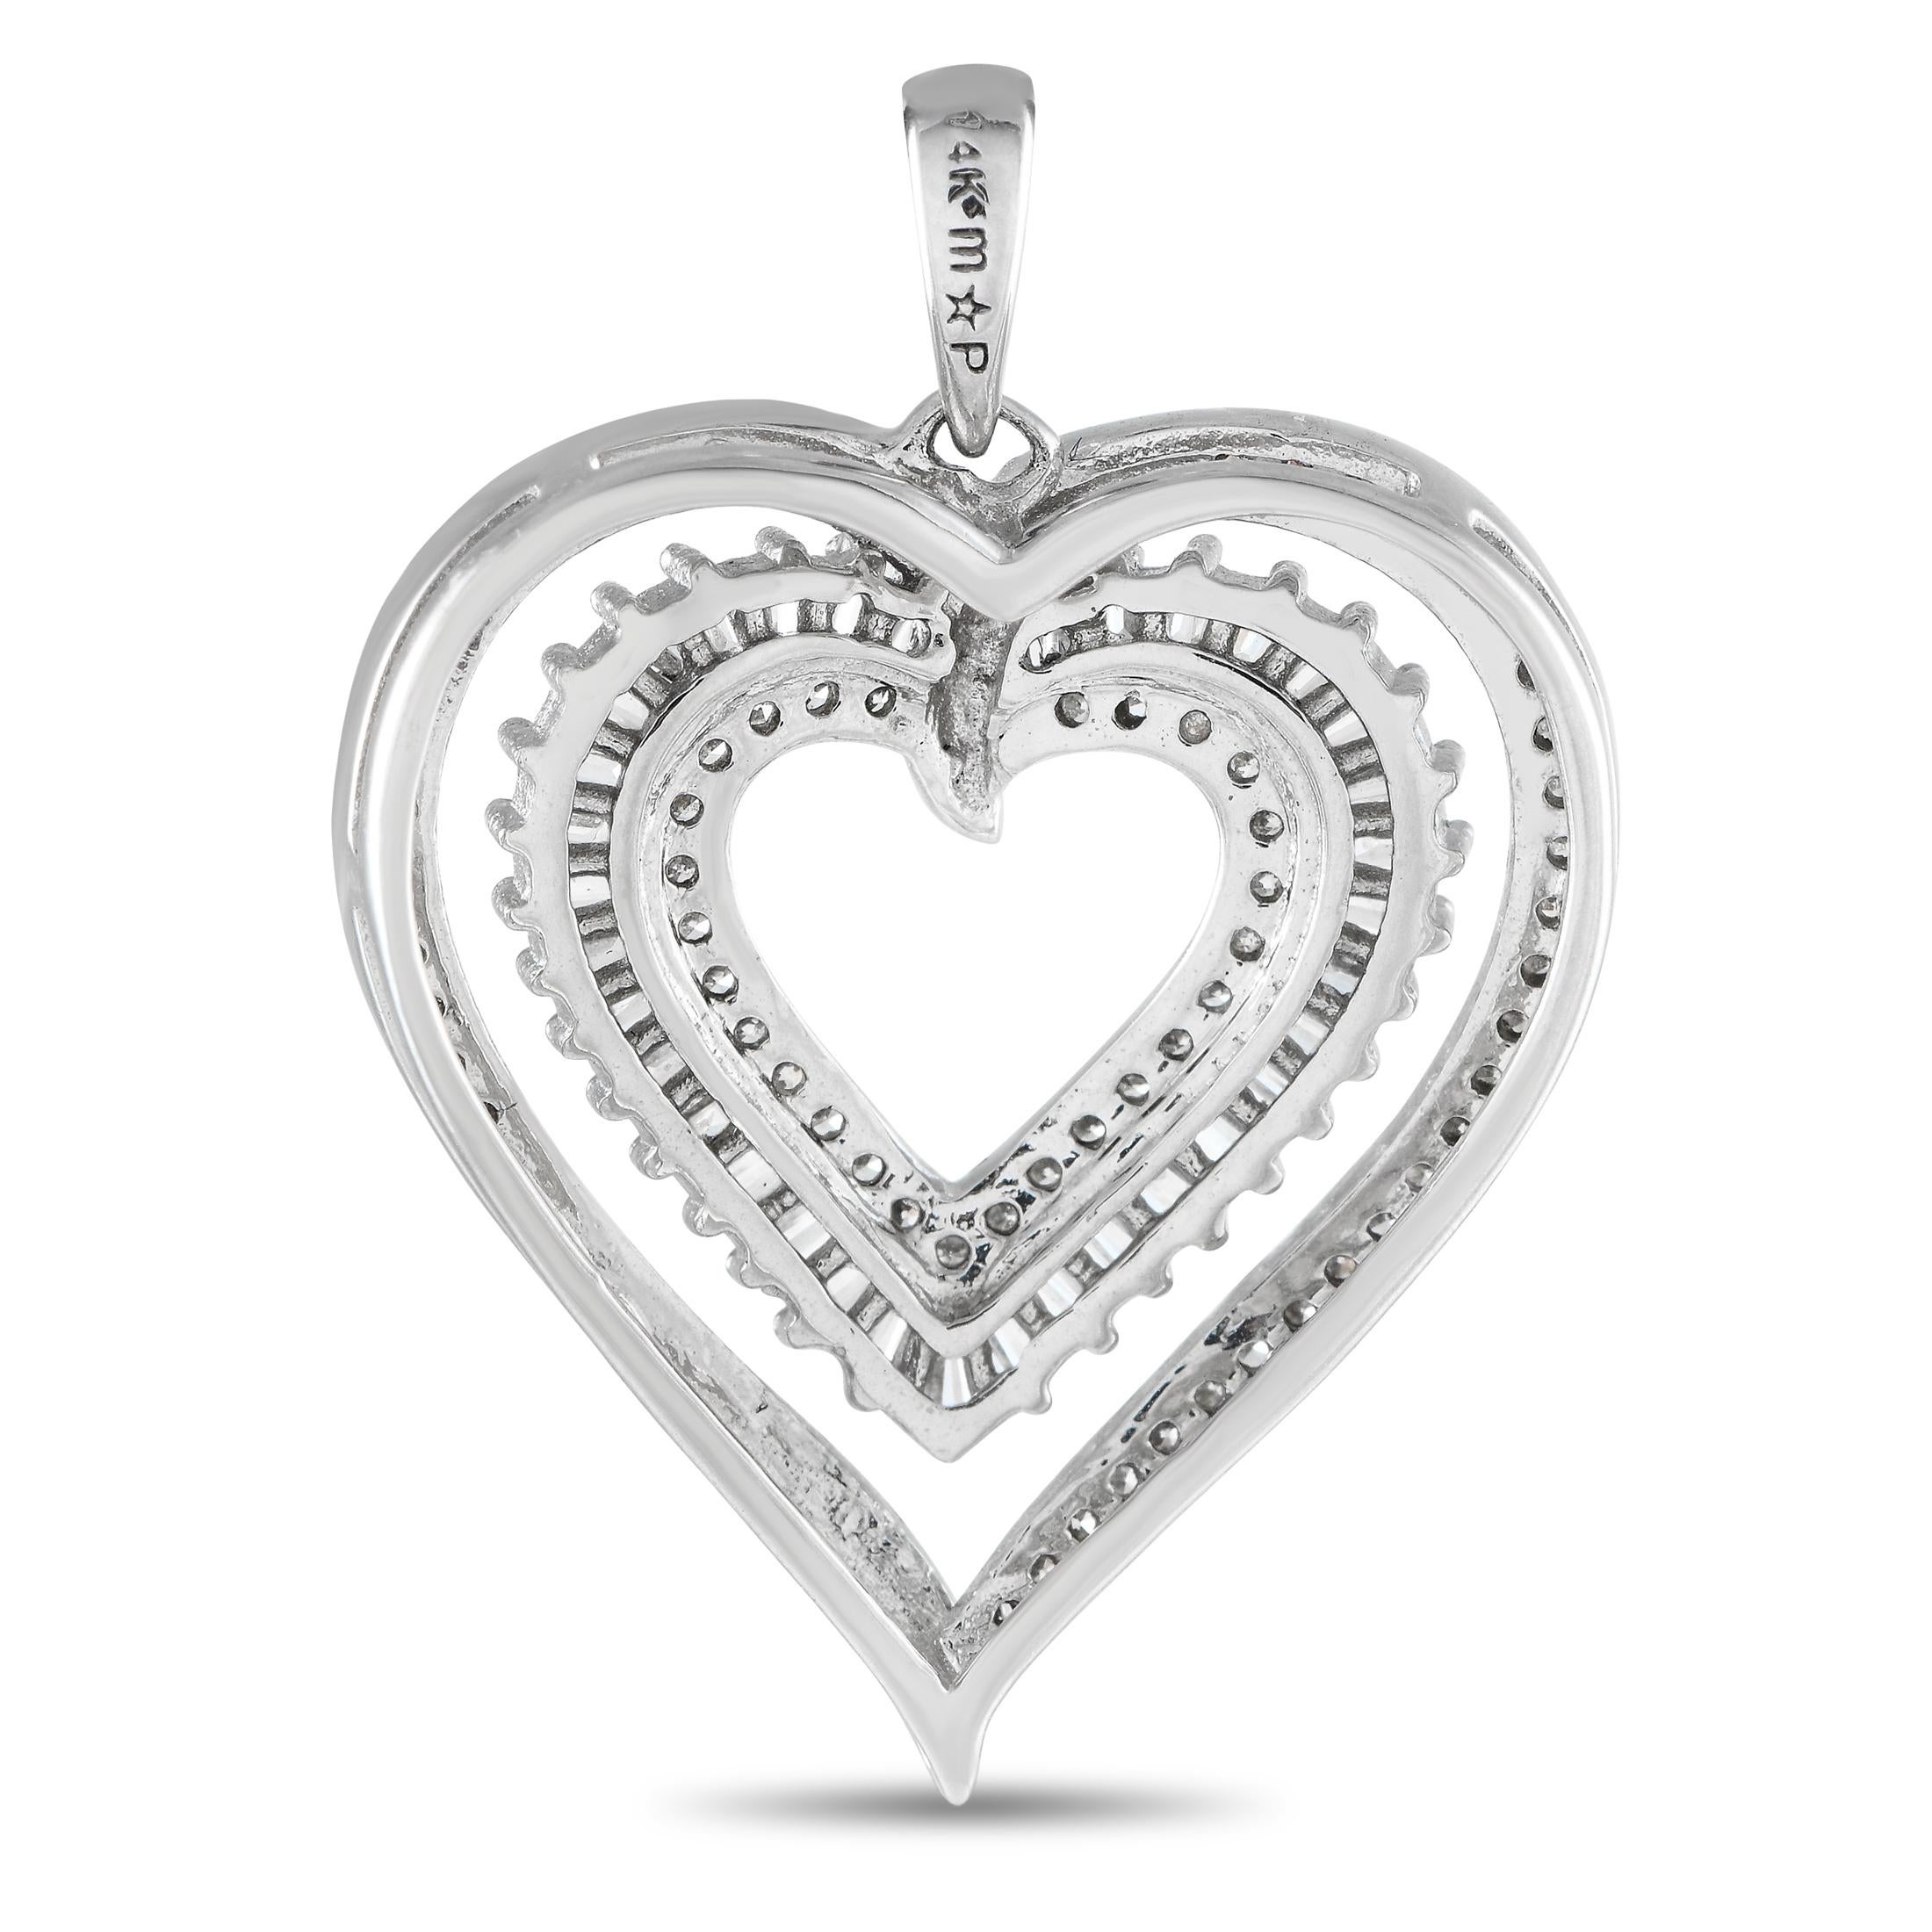 Sweeten your look with sparkle and femininity through this diamond heart pendant. It features a concentric pattern with three heart-shaped outlines. The innermost heart has round diamonds, followed by a heart outline filled with tapered baguette